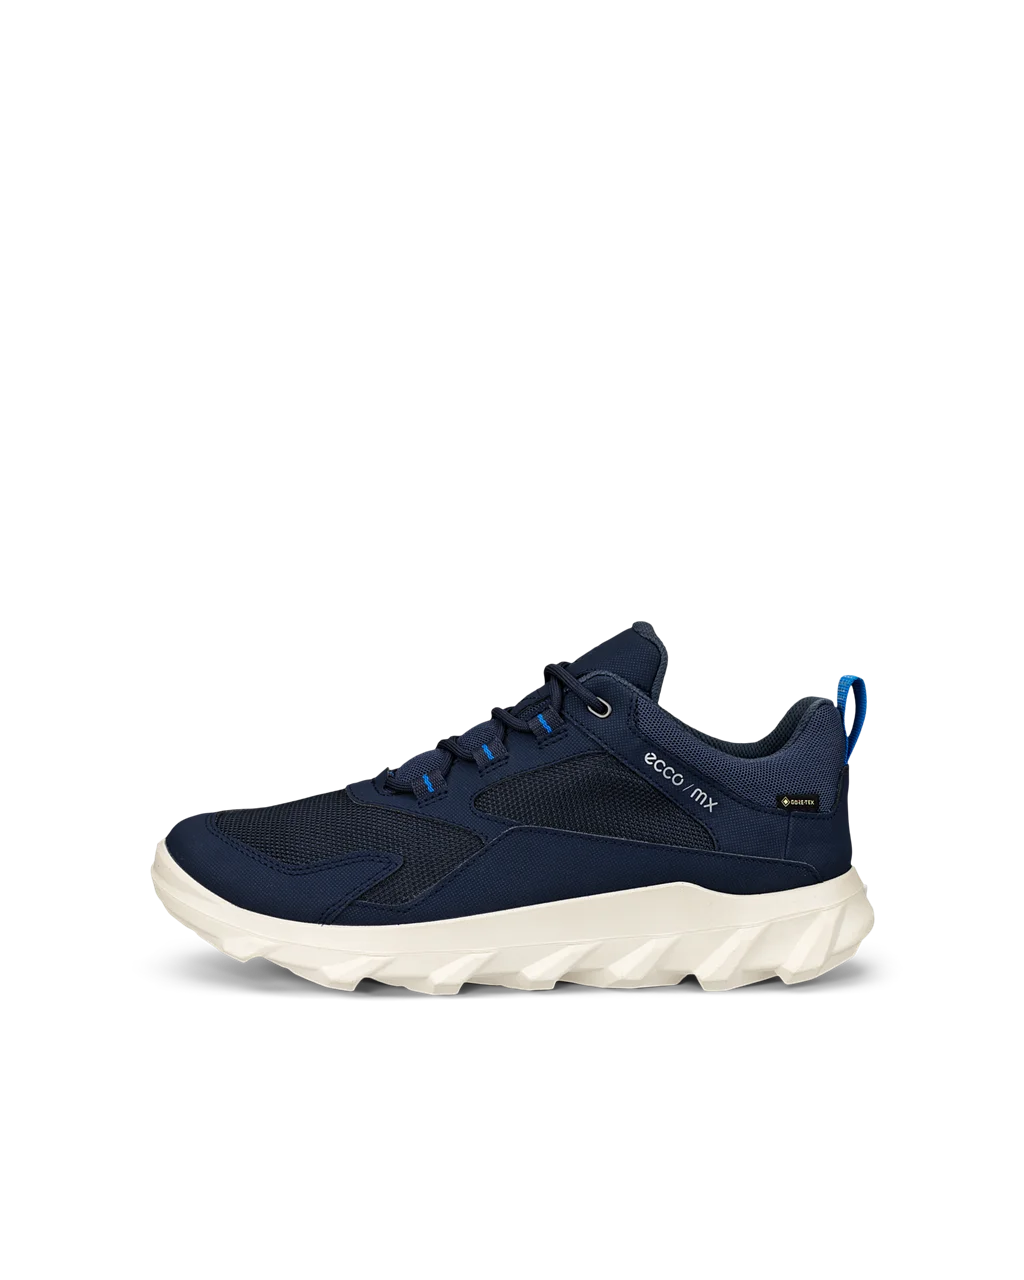 ECCO Hombre MX Bajo GORE-TEX Impermeable Walking Hiking Trainers